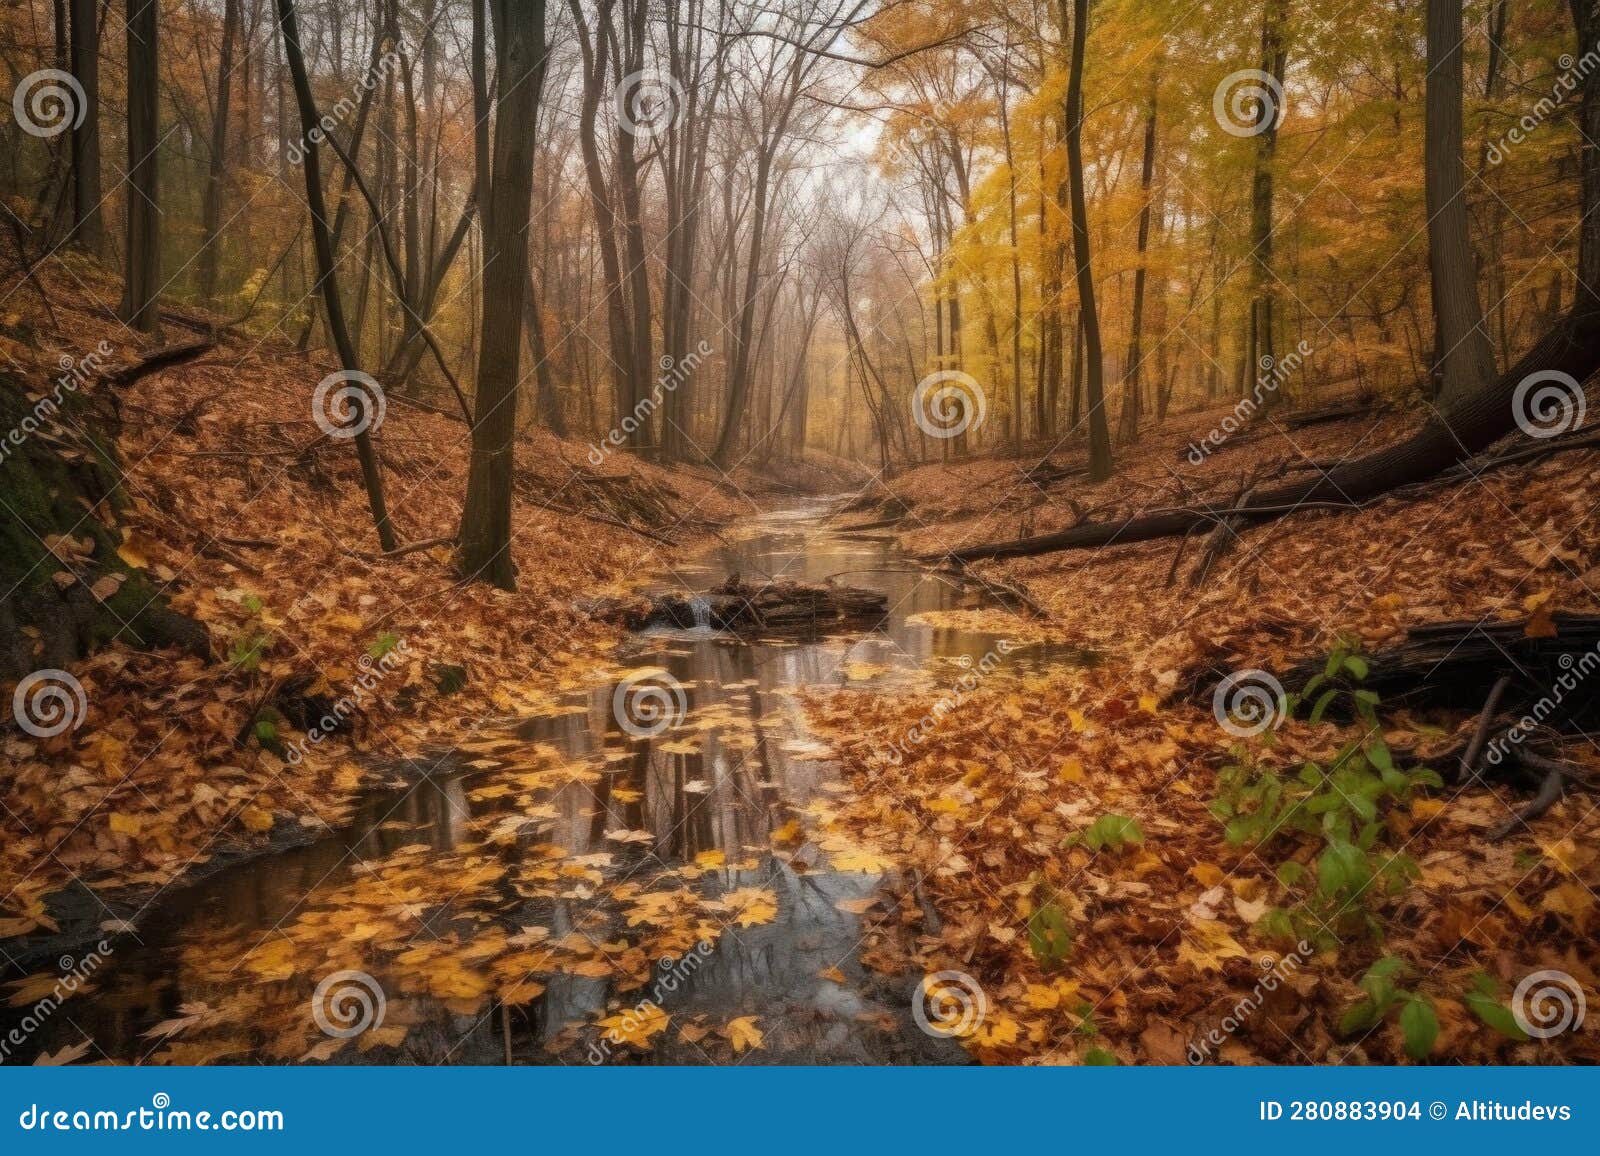 Autumn Forest Hike with Crunchy Leaves and a Stream in the Background ...